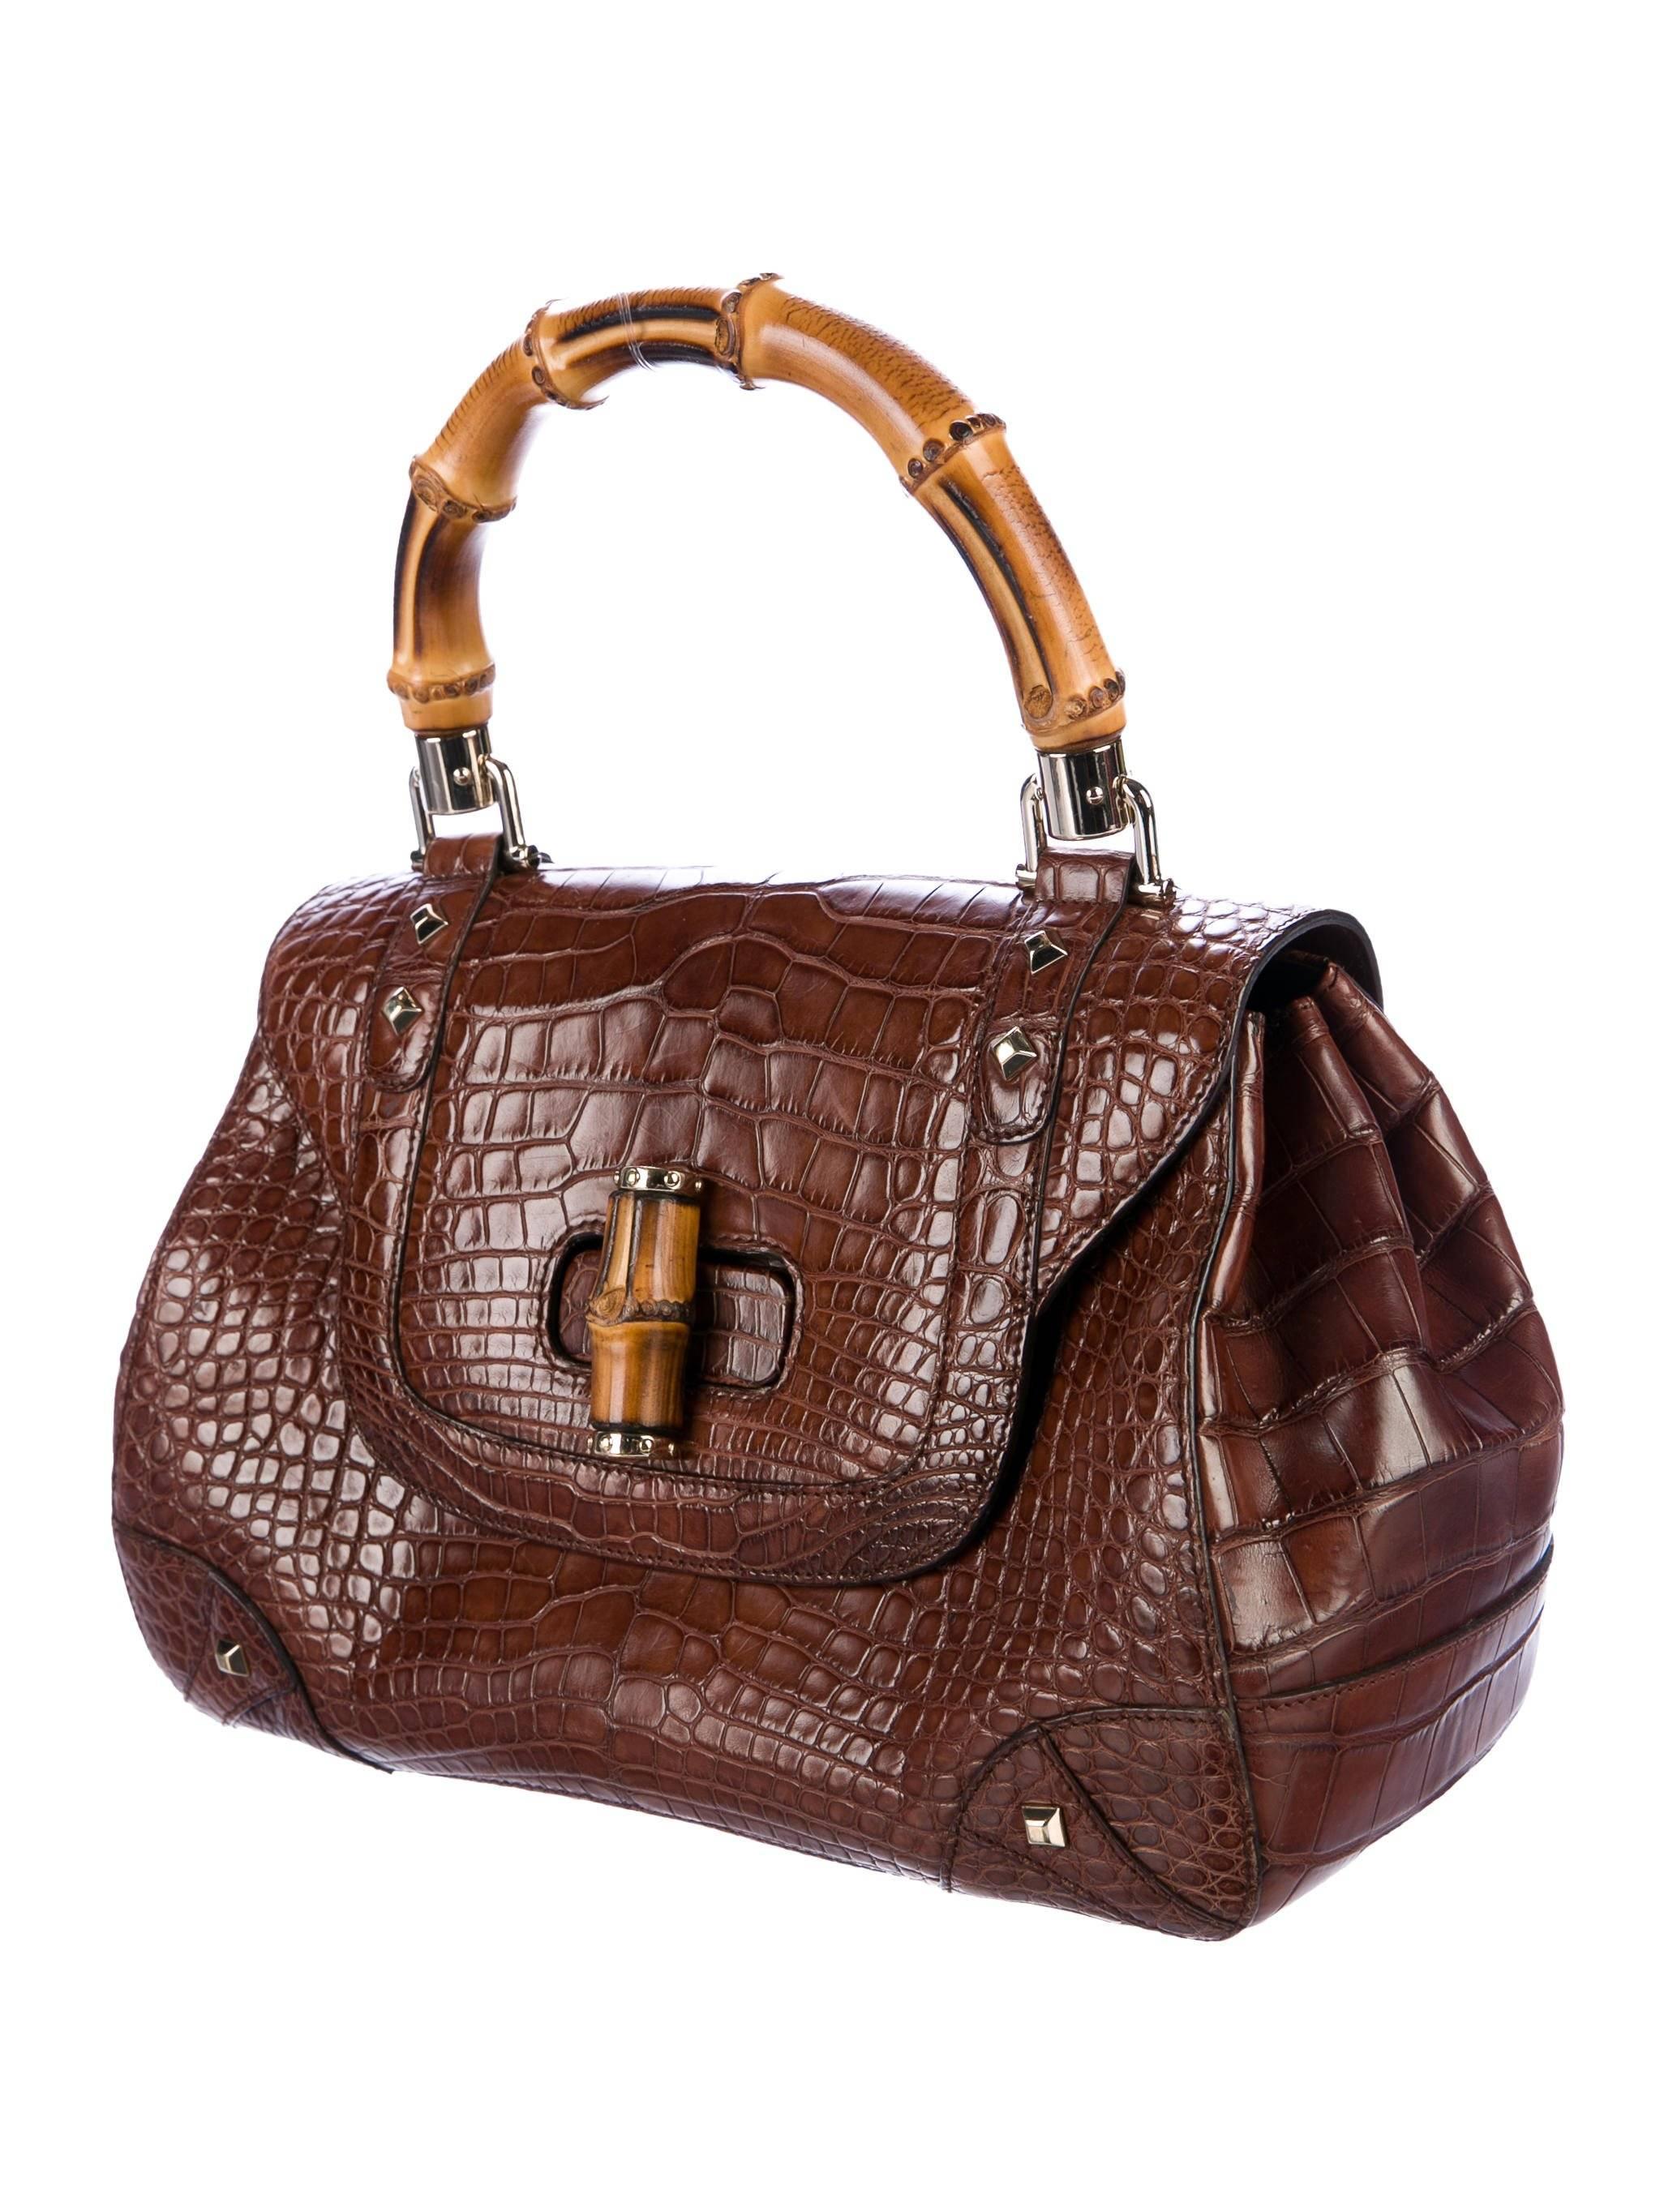 Gucci Cognac Brown Alligator Exotic Skin Leather Bamboo Evening Satchel Bag

Alligator 
Bamboo
Silver tone hardware
Leather lining
Turn lock closure
Handle drop 5"
Measures 11.5" W x 8" H x 4.5" D 
Includes original Gucci dust bag